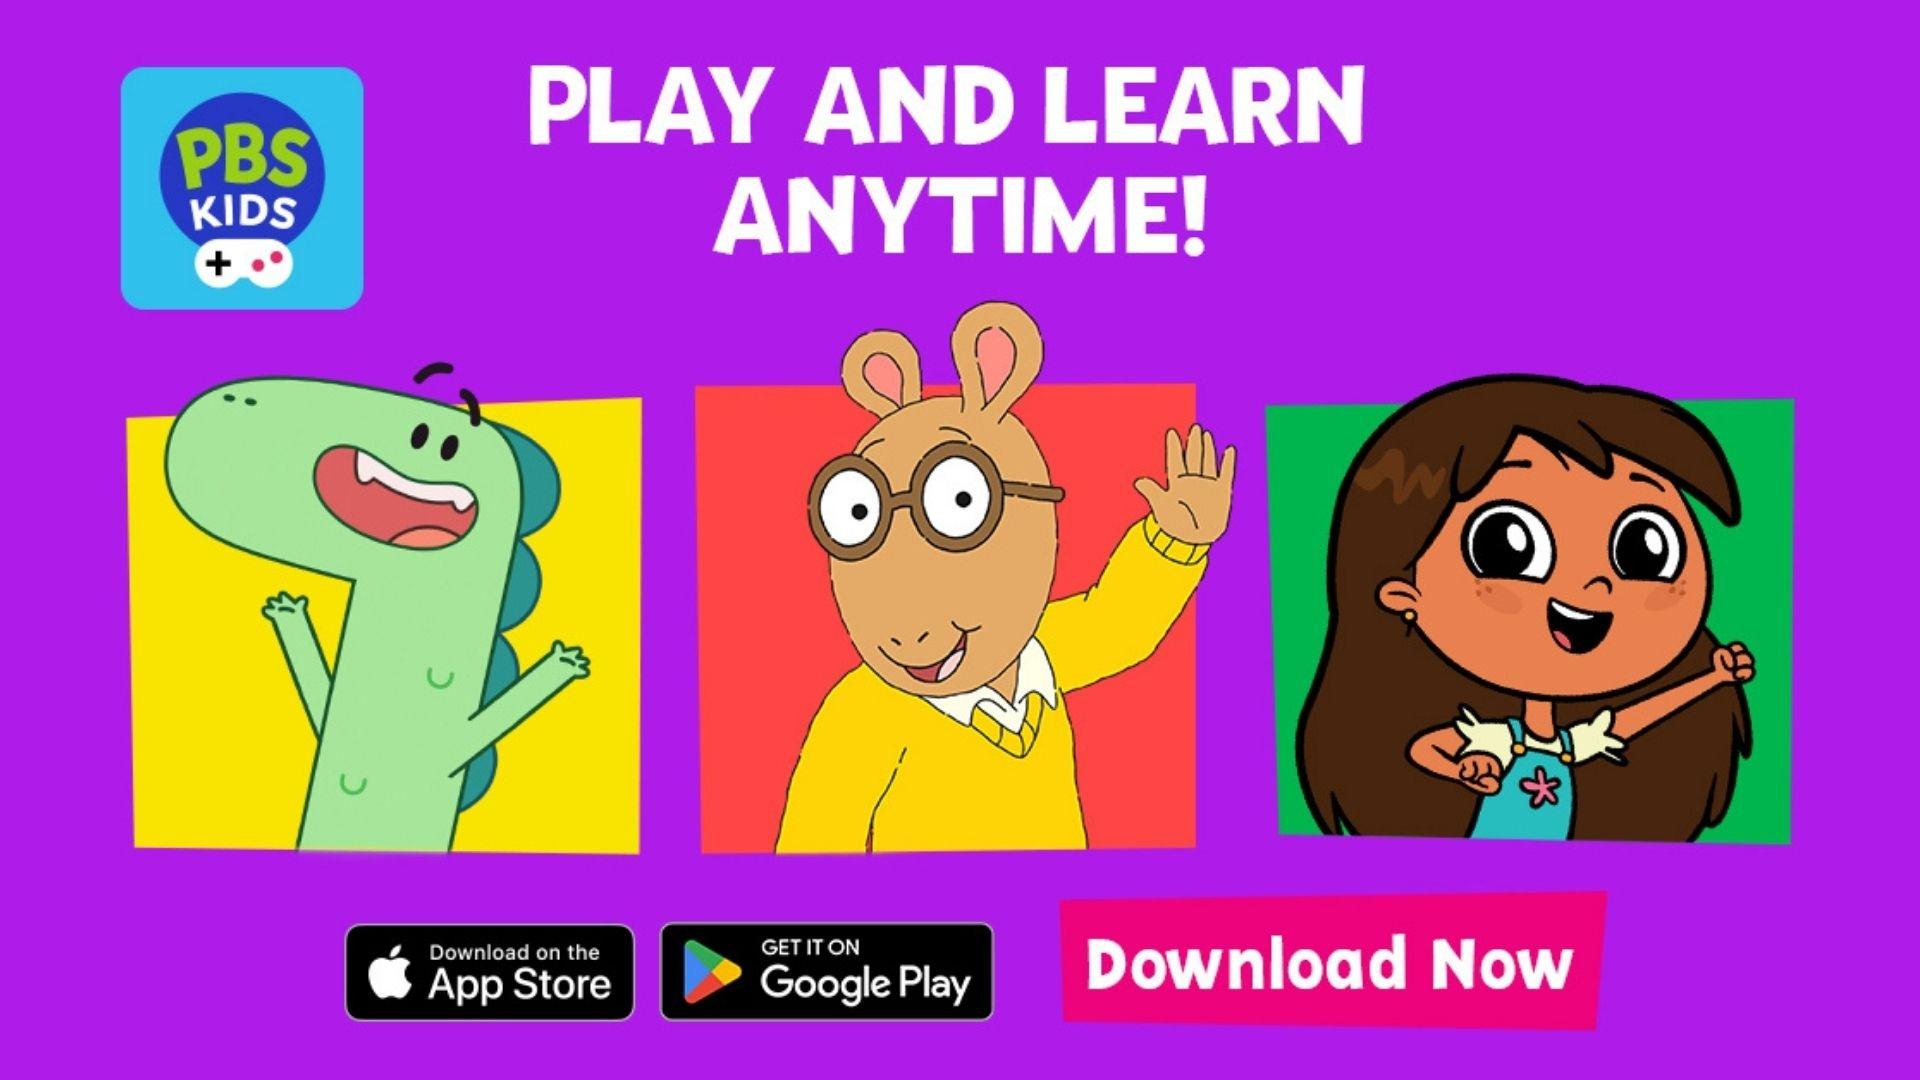 Games App. Play and Learn Anytime!